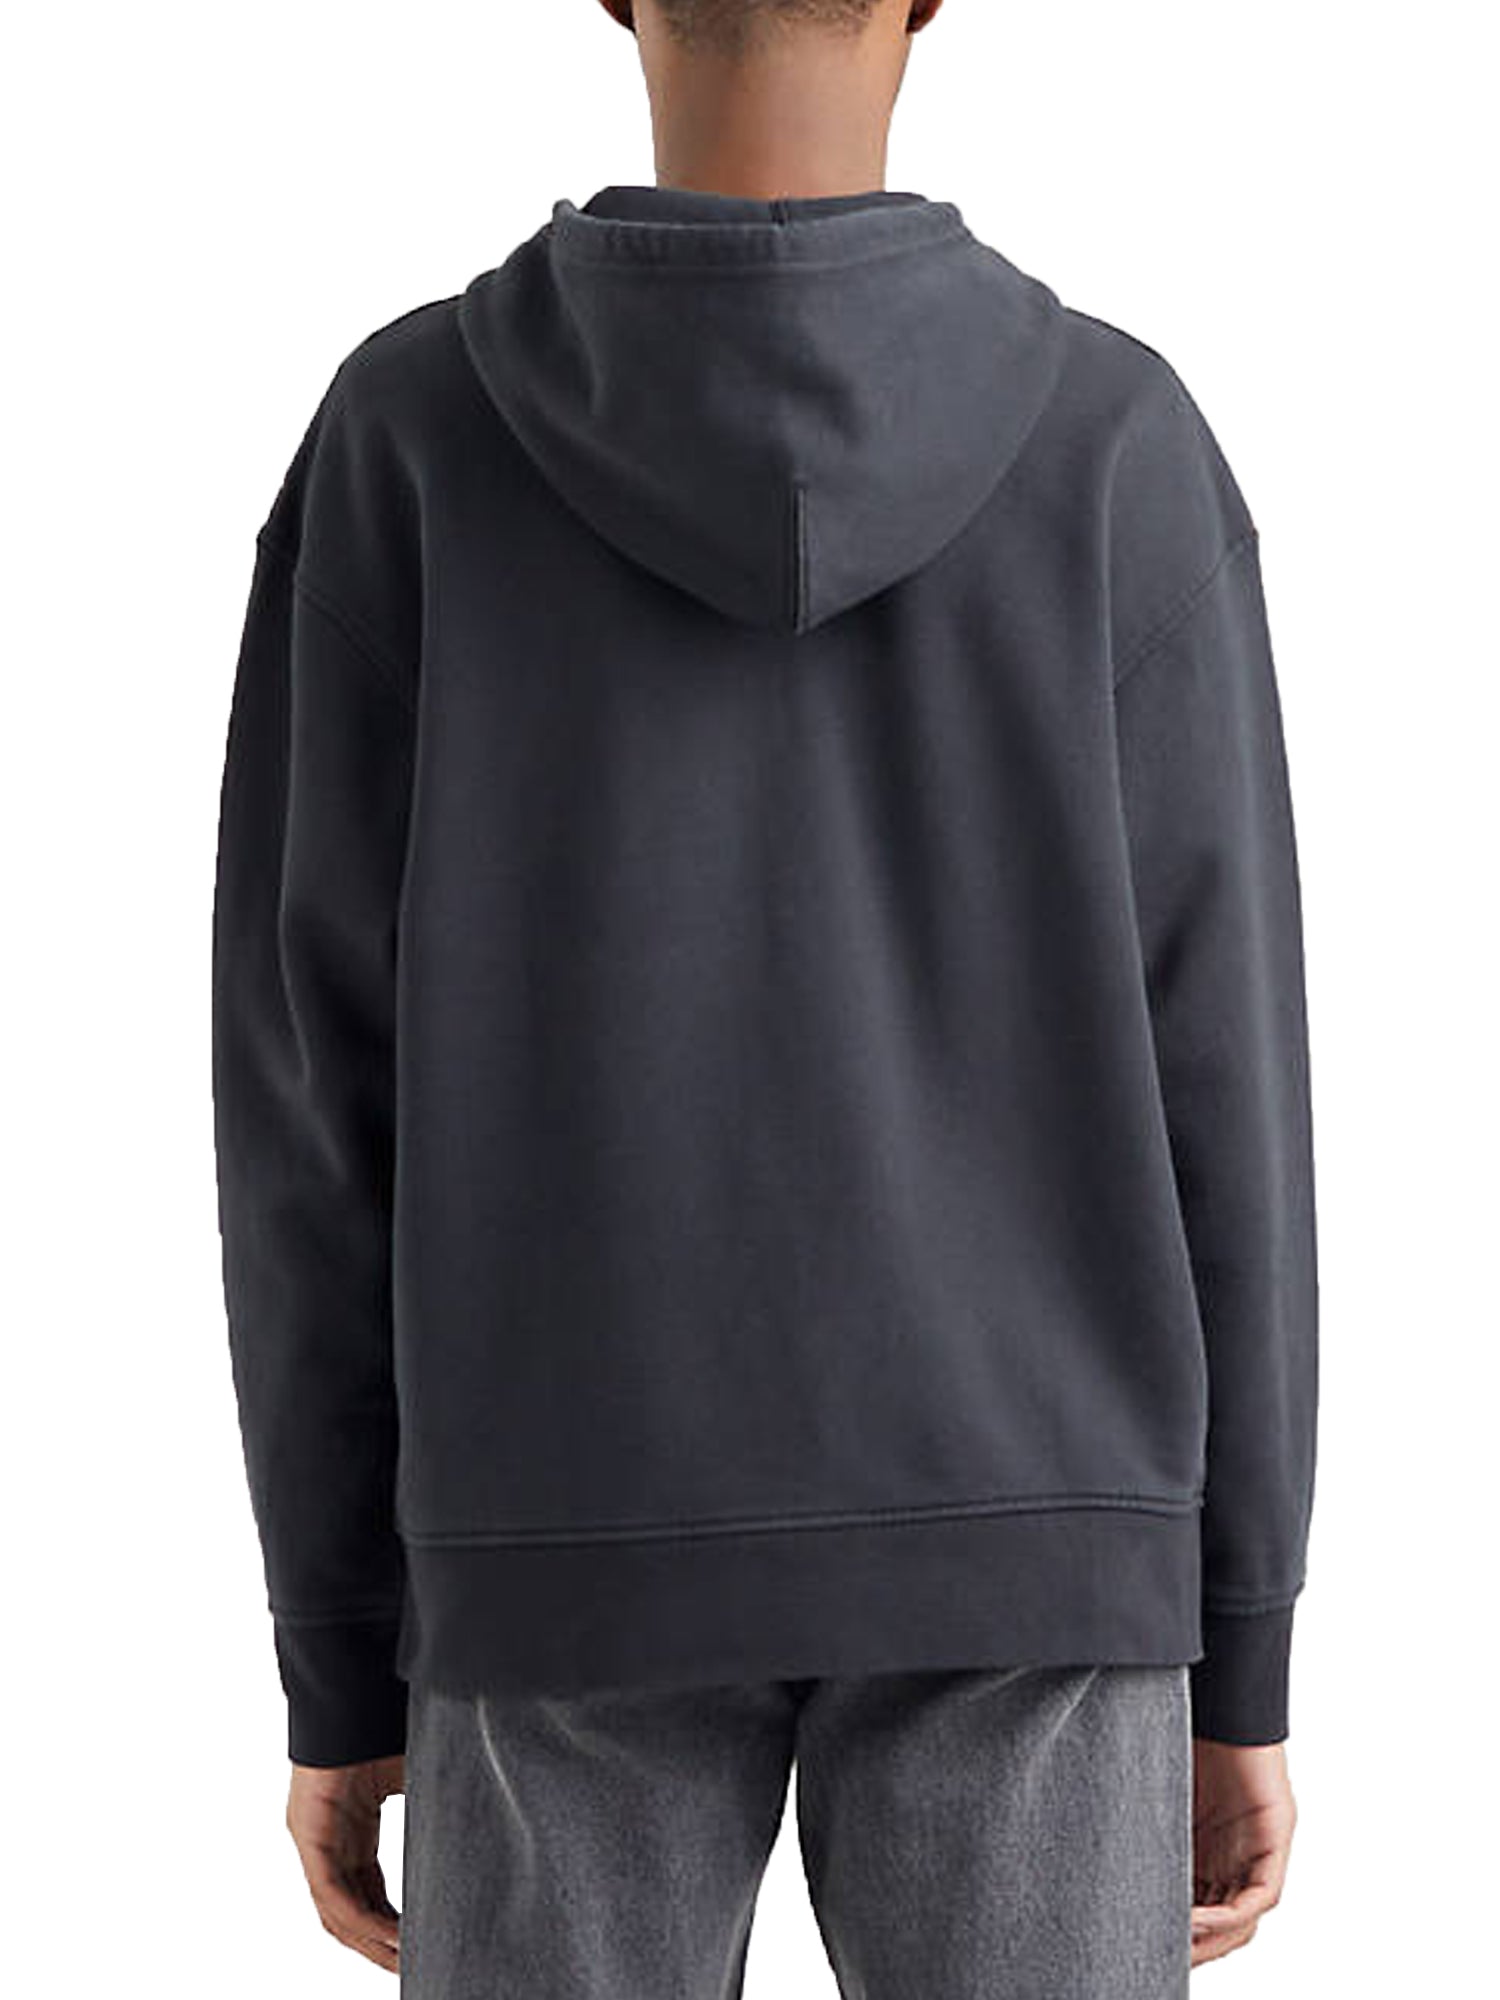 RELAXED GRAPHIC ZIP UP HODDIE